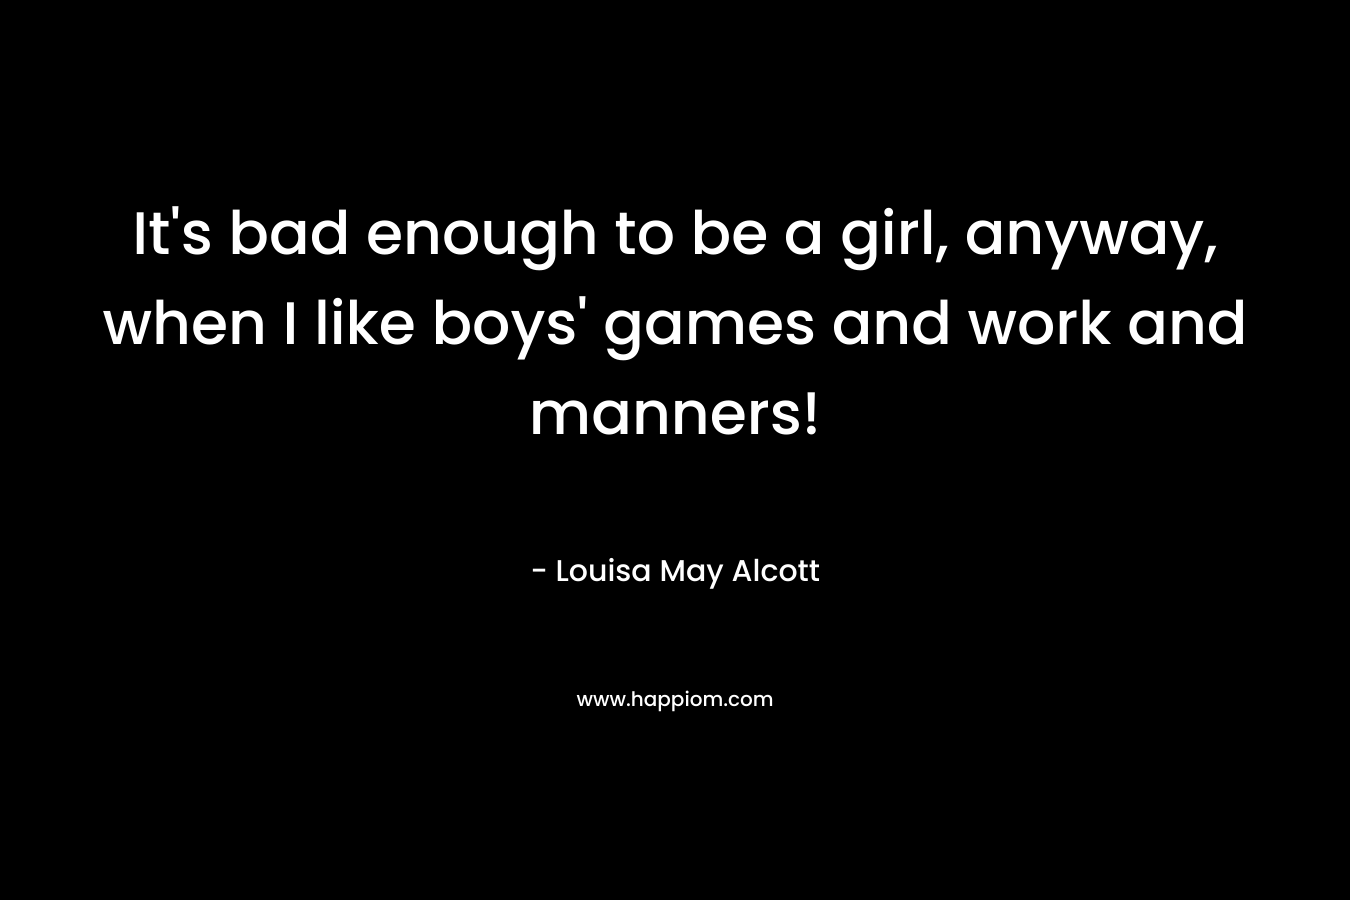 It's bad enough to be a girl, anyway, when I like boys' games and work and manners!